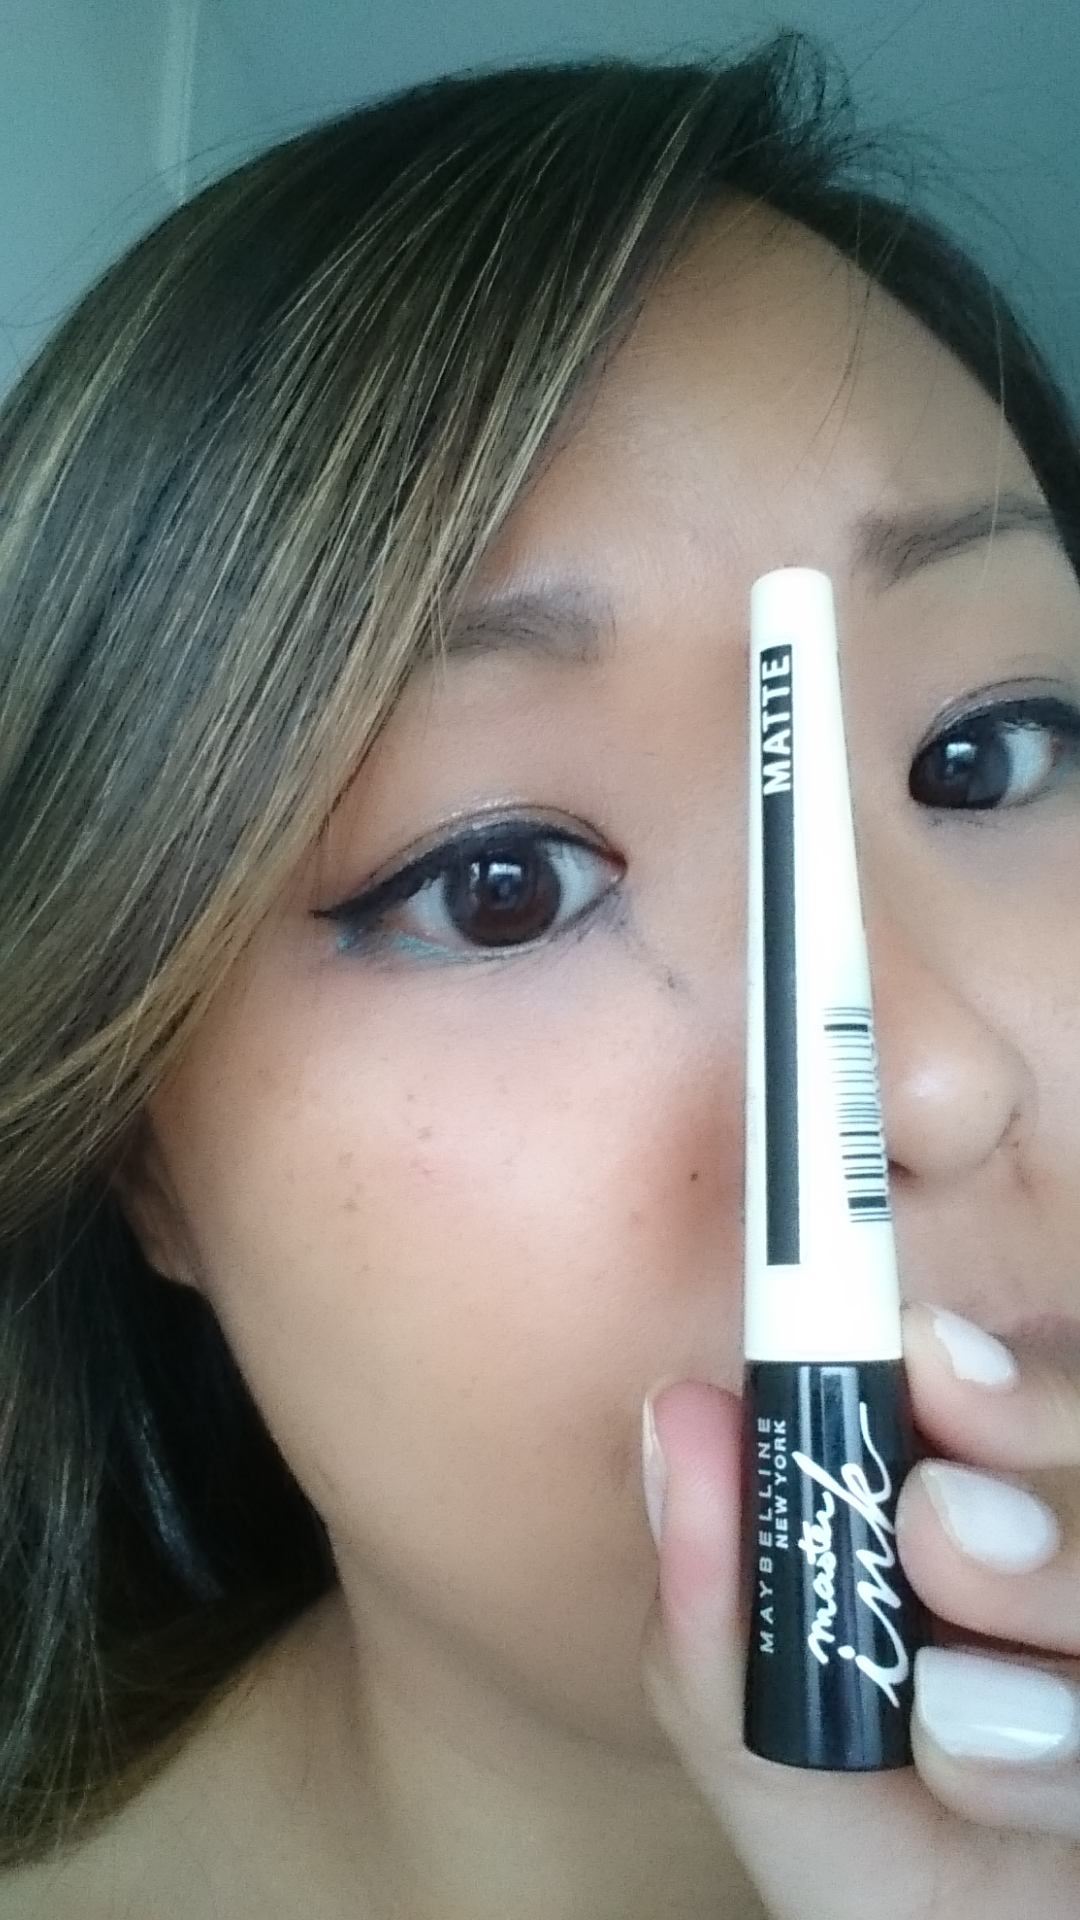 Sceptisch Conflict constant Review of Maybelline master ink matte | nhieu.beauty